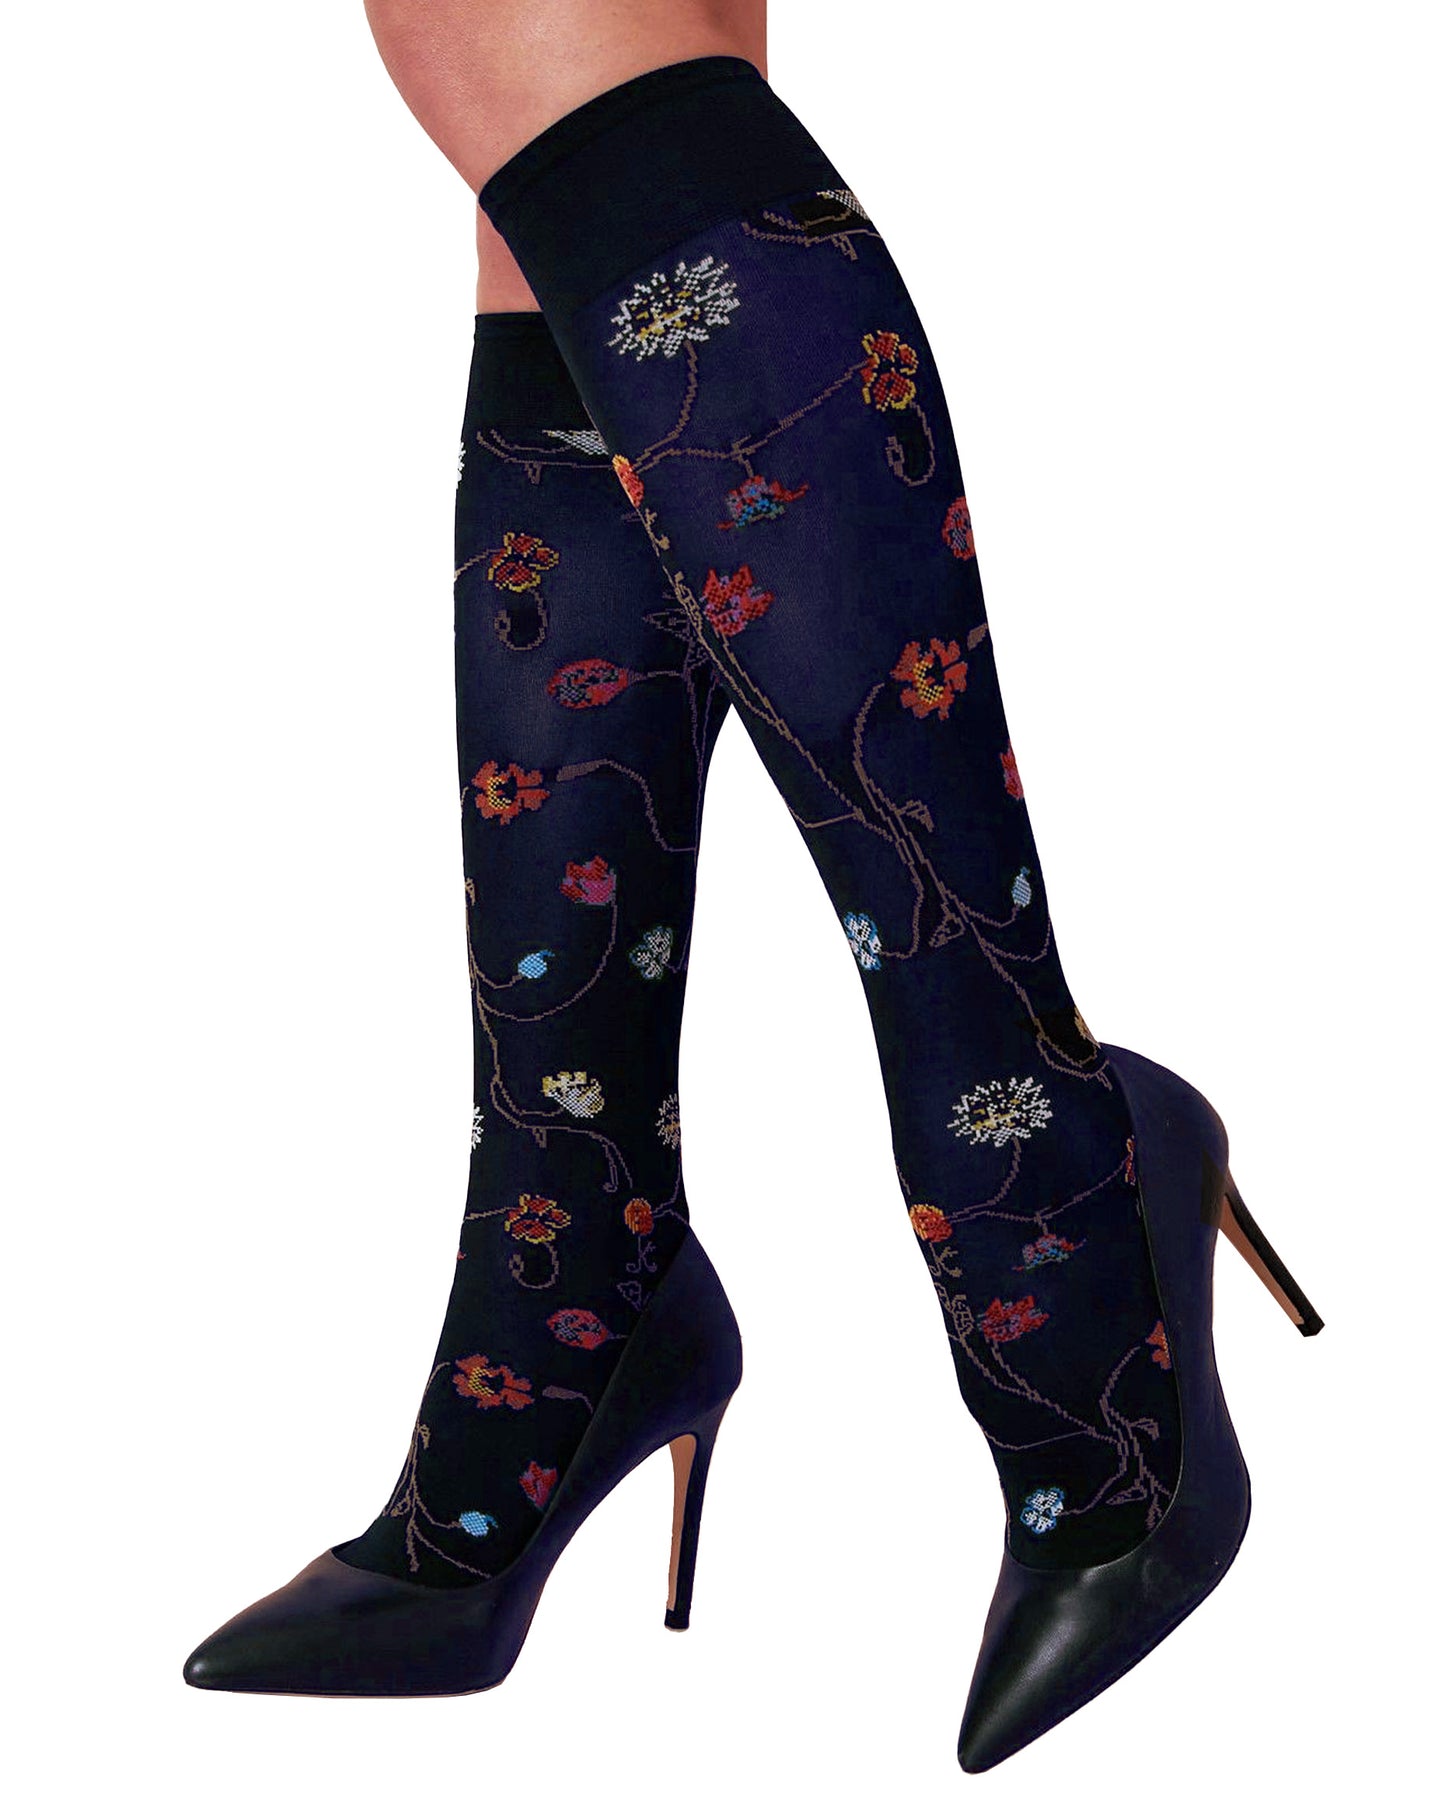 Trasparenze Platino Gambaletto - Navy blue soft opaque fashion knee-high socks with a multicoloured woven flower pattern.